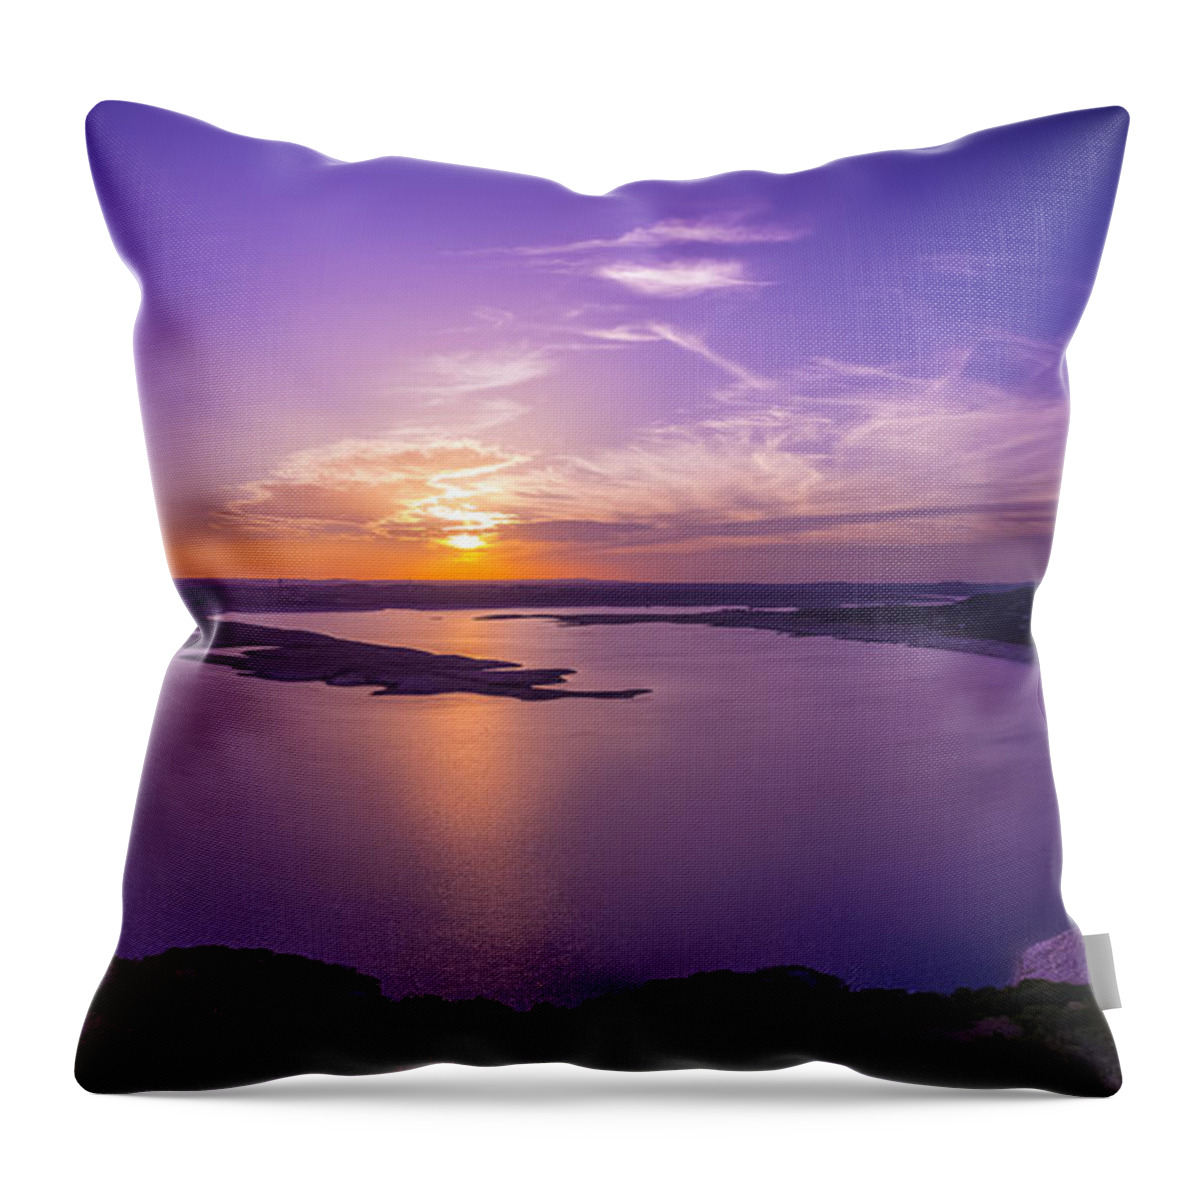 Lake Travis Sunset Throw Pillow featuring the photograph Lake Travis Sunset by David Morefield